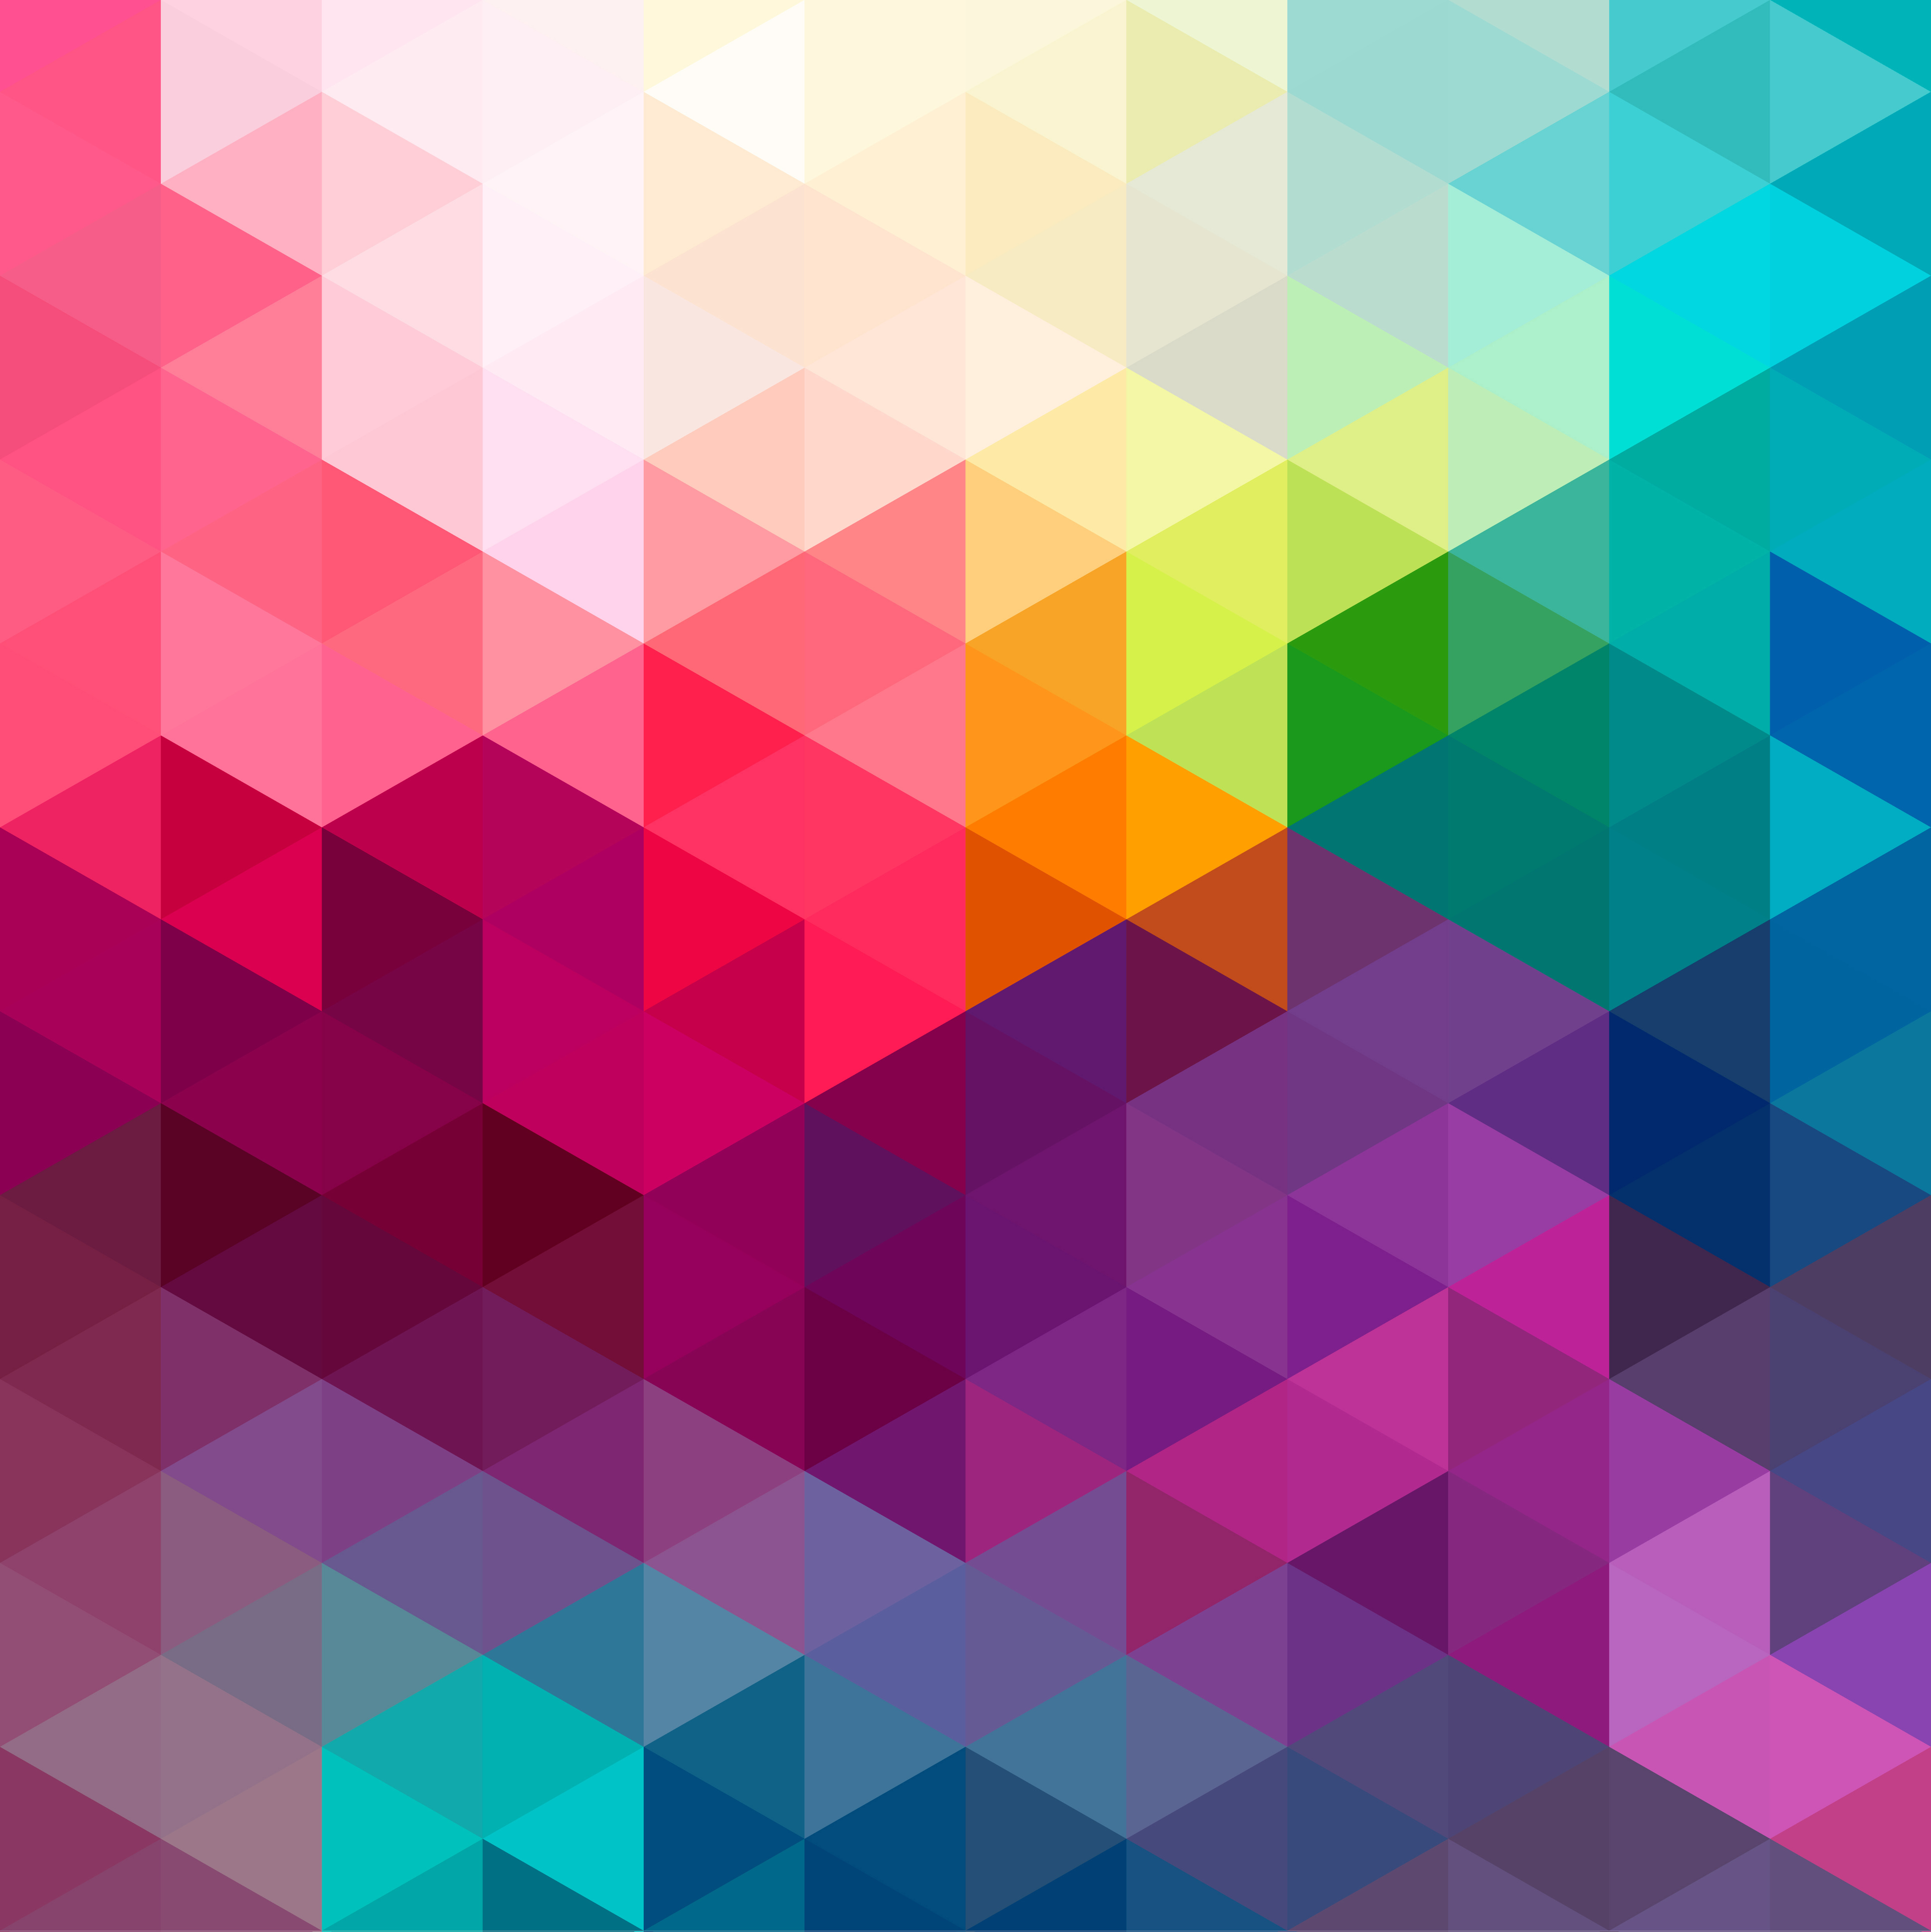 SEDL_2015.jpg (Abstract colorful seamless pattern background)